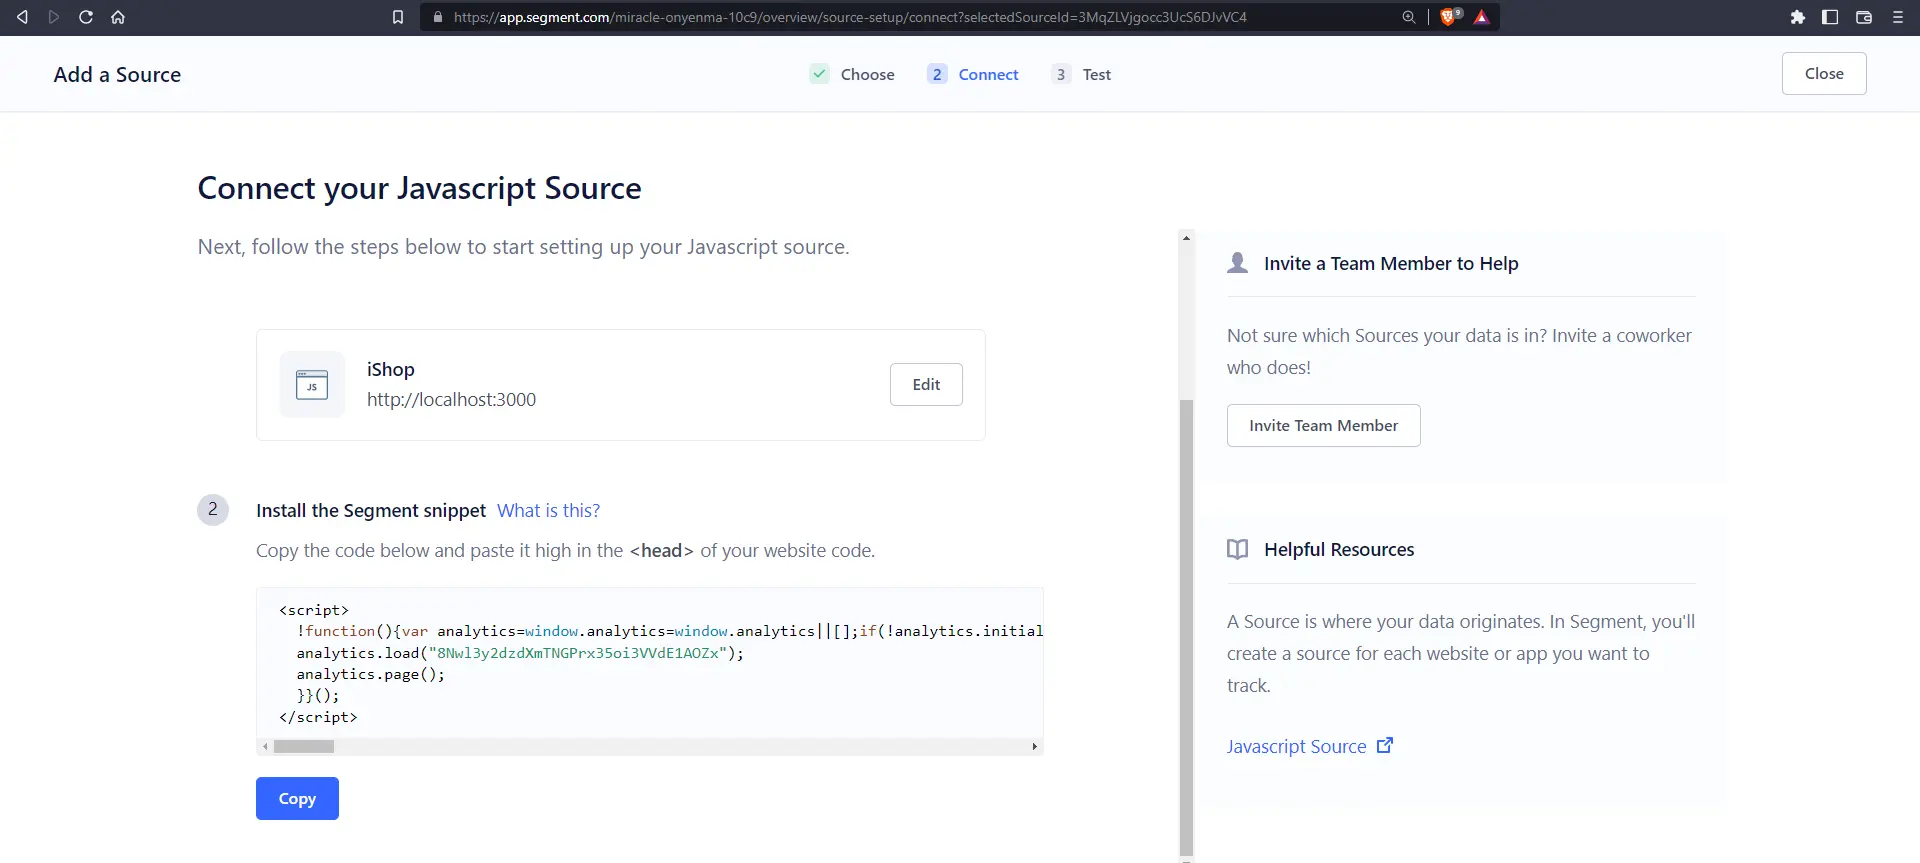 Connect your Javascript Source page